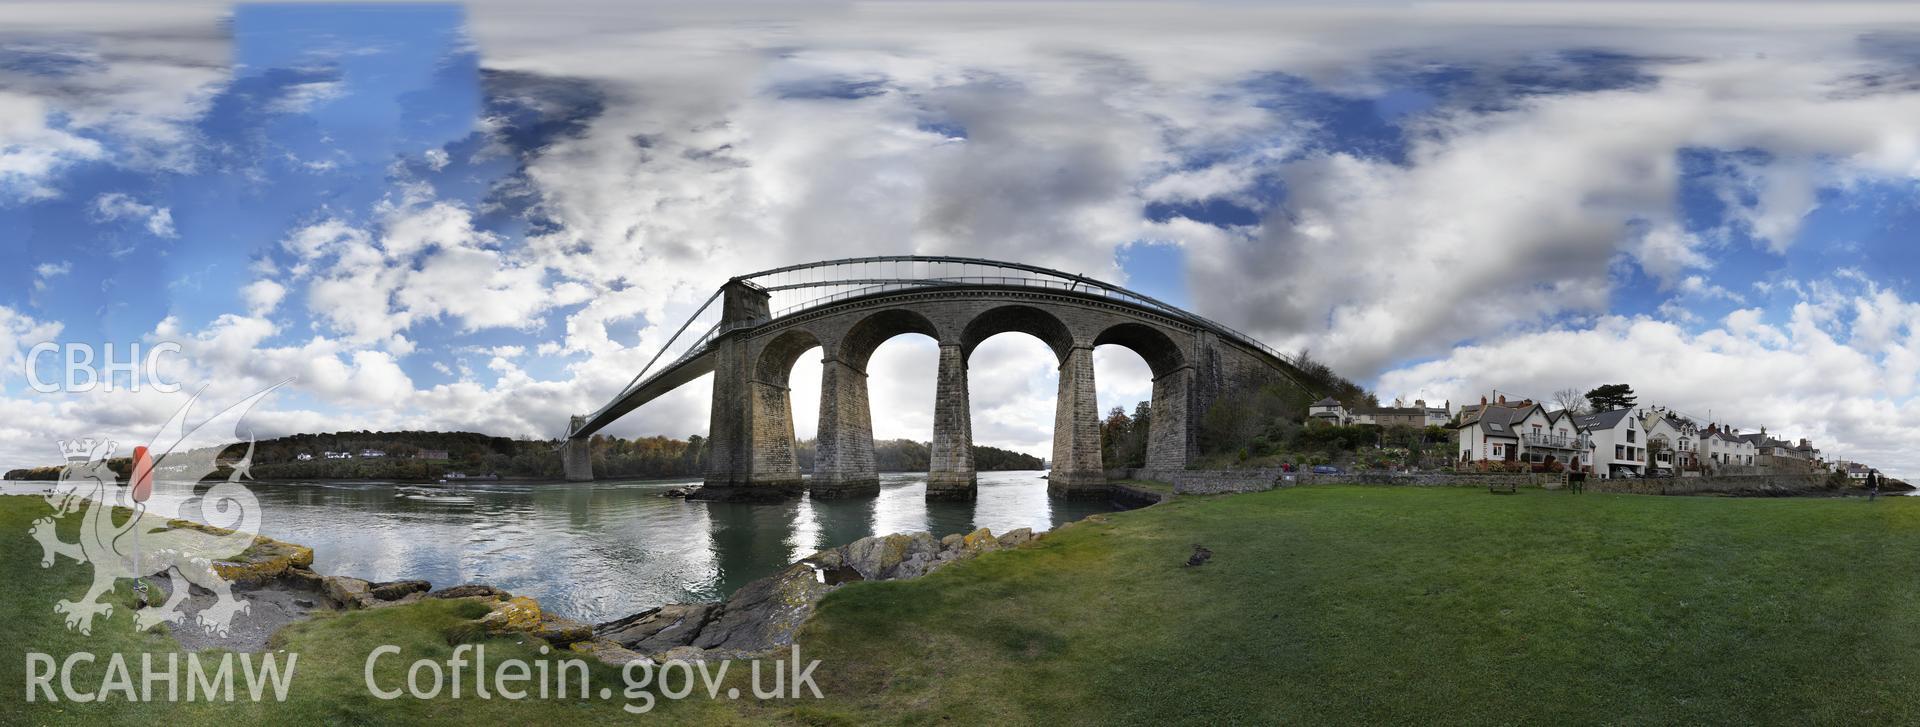 Reduced resolution .tiff file of stitched images from the Menai Bridge gigapan project, carried out by Scott Lloyd and Rita Singer, October 2017. An uncropped image required for Coflein.